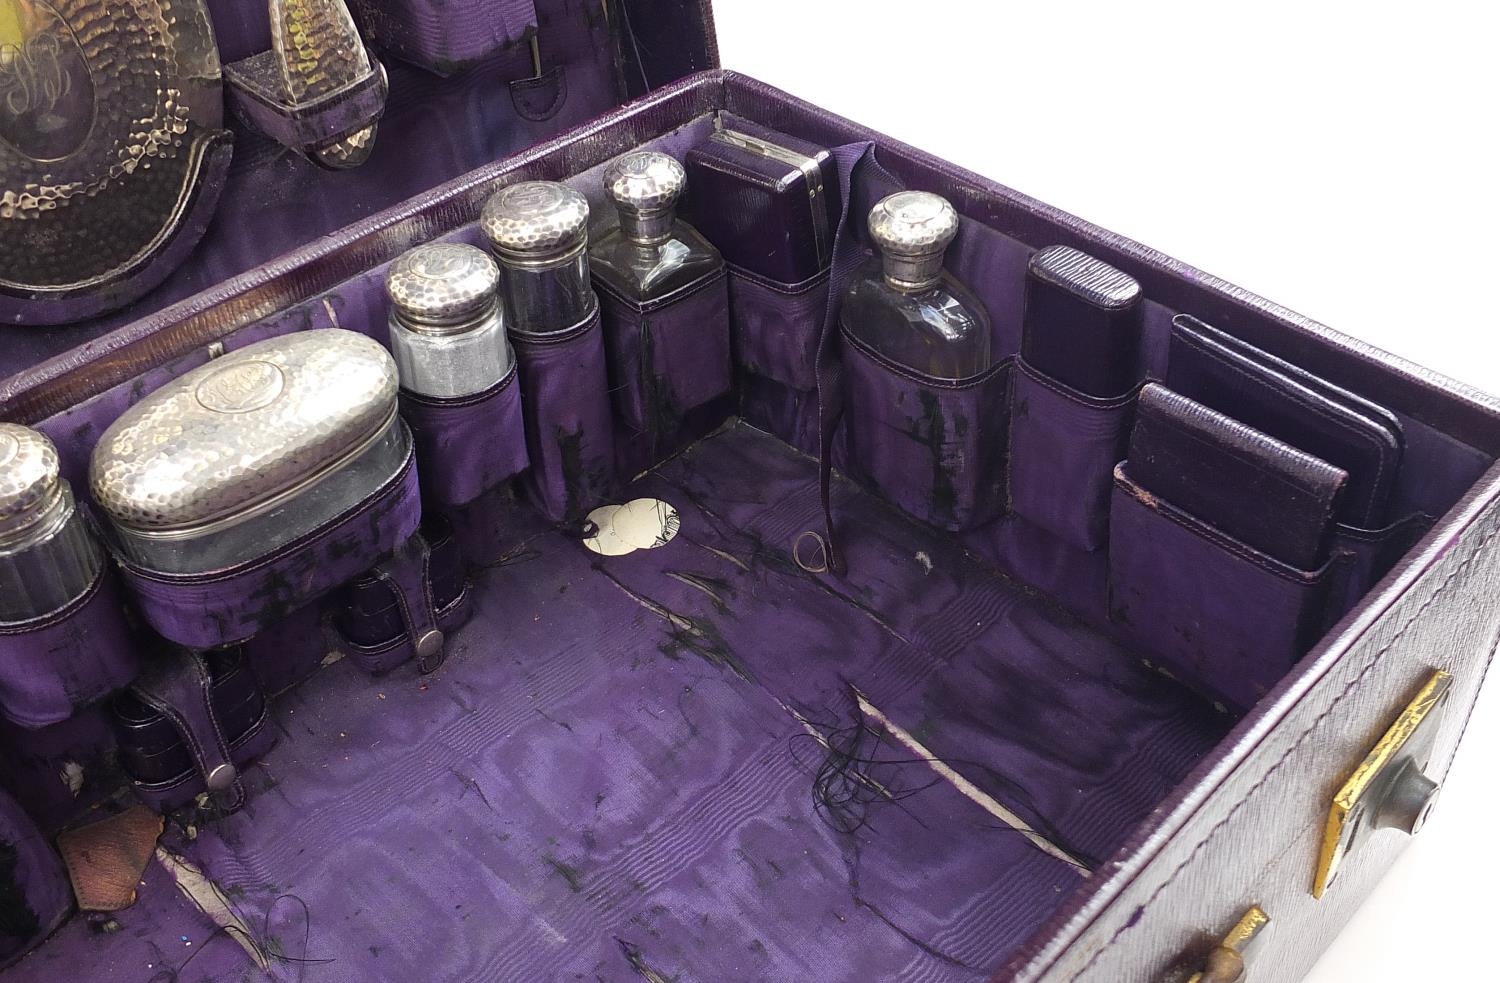 Edwardian purple leather travelling vanity case with silver mounted items including brushes, - Image 4 of 8